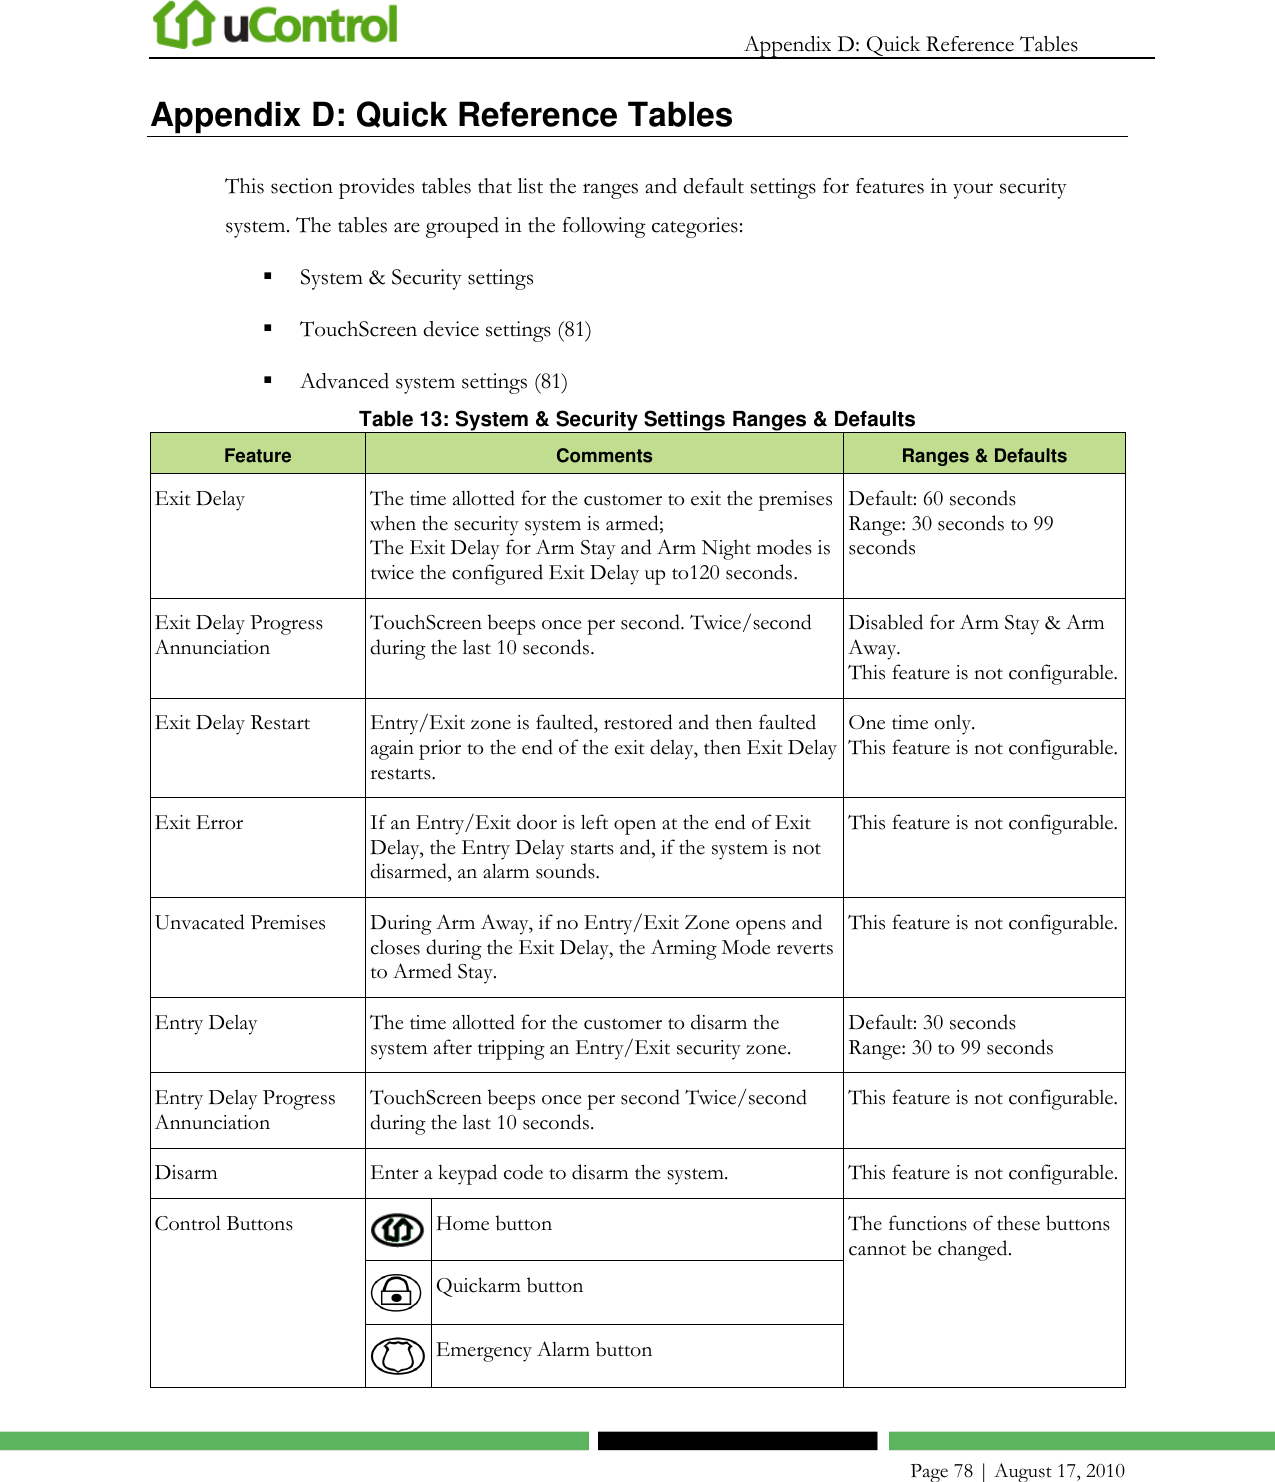   Appendix D: Quick Reference Tables    Page 78 | August 17, 2010 Appendix D: Quick Reference Tables  This section provides tables that list the ranges and default settings for features in your security system. The tables are grouped in the following categories:  System &amp; Security settings   TouchScreen device settings (81)  Advanced system settings (81) Table 13: System &amp; Security Settings Ranges &amp; Defaults Feature Comments Ranges &amp; Defaults Exit Delay The time allotted for the customer to exit the premises when the security system is armed;  The Exit Delay for Arm Stay and Arm Night modes is twice the configured Exit Delay up to120 seconds. Default: 60 seconds Range: 30 seconds to 99 seconds Exit Delay Progress Annunciation TouchScreen beeps once per second. Twice/second during the last 10 seconds. Disabled for Arm Stay &amp; Arm Away.  This feature is not configurable. Exit Delay Restart Entry/Exit zone is faulted, restored and then faulted again prior to the end of the exit delay, then Exit Delay restarts.  One time only.  This feature is not configurable. Exit Error If an Entry/Exit door is left open at the end of Exit Delay, the Entry Delay starts and, if the system is not disarmed, an alarm sounds.  This feature is not configurable. Unvacated Premises During Arm Away, if no Entry/Exit Zone opens and closes during the Exit Delay, the Arming Mode reverts to Armed Stay.  This feature is not configurable. Entry Delay The time allotted for the customer to disarm the system after tripping an Entry/Exit security zone.   Default: 30 seconds Range: 30 to 99 seconds Entry Delay Progress Annunciation TouchScreen beeps once per second Twice/second during the last 10 seconds. This feature is not configurable. Disarm Enter a keypad code to disarm the system. This feature is not configurable. Control Buttons  Home button The functions of these buttons cannot be changed.   Quickarm button  Emergency Alarm button 